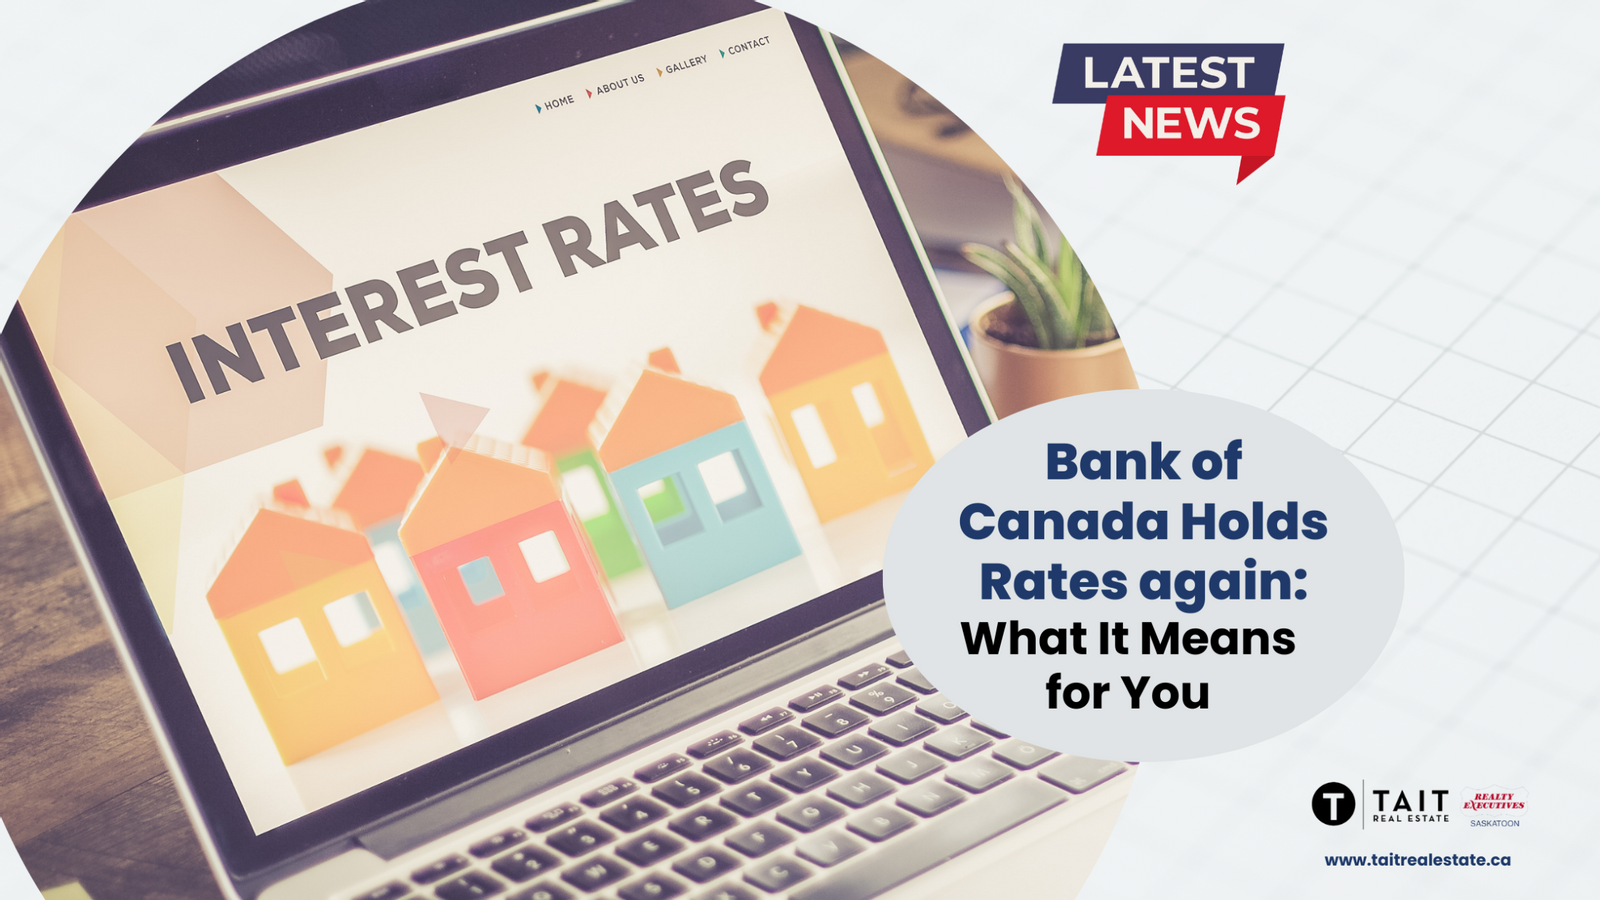 Bank of Canada Holds Rates again: What this means for you?